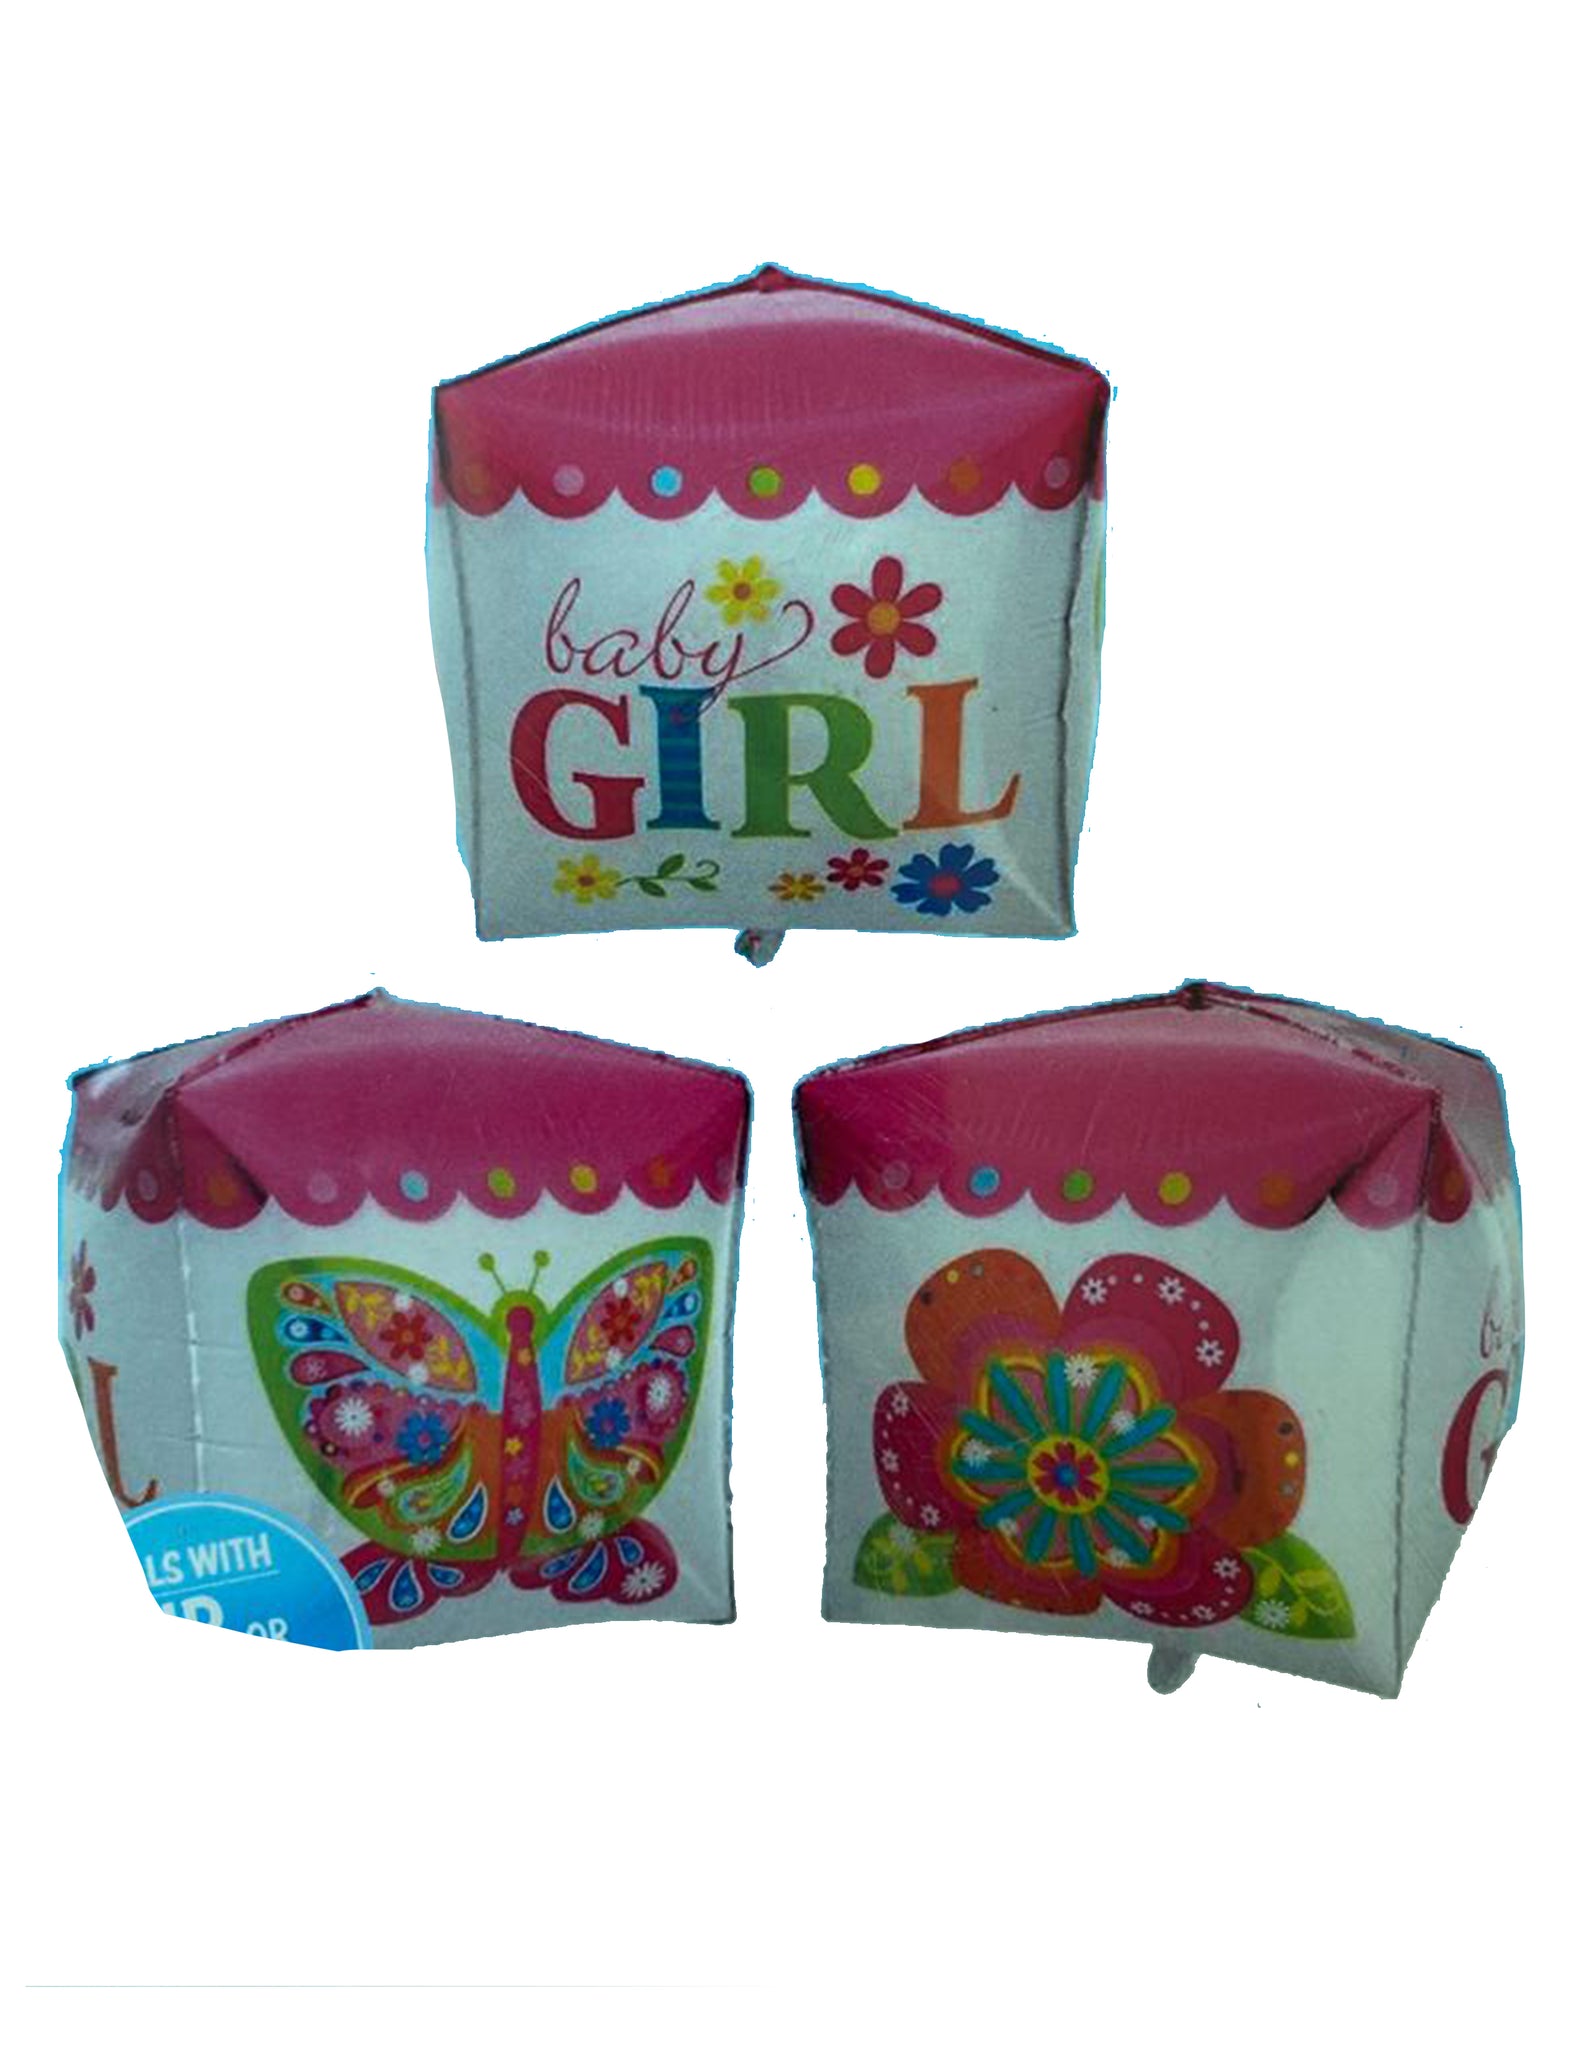 Baby girl 4 sided box shaped balloon for sale online in Dubai